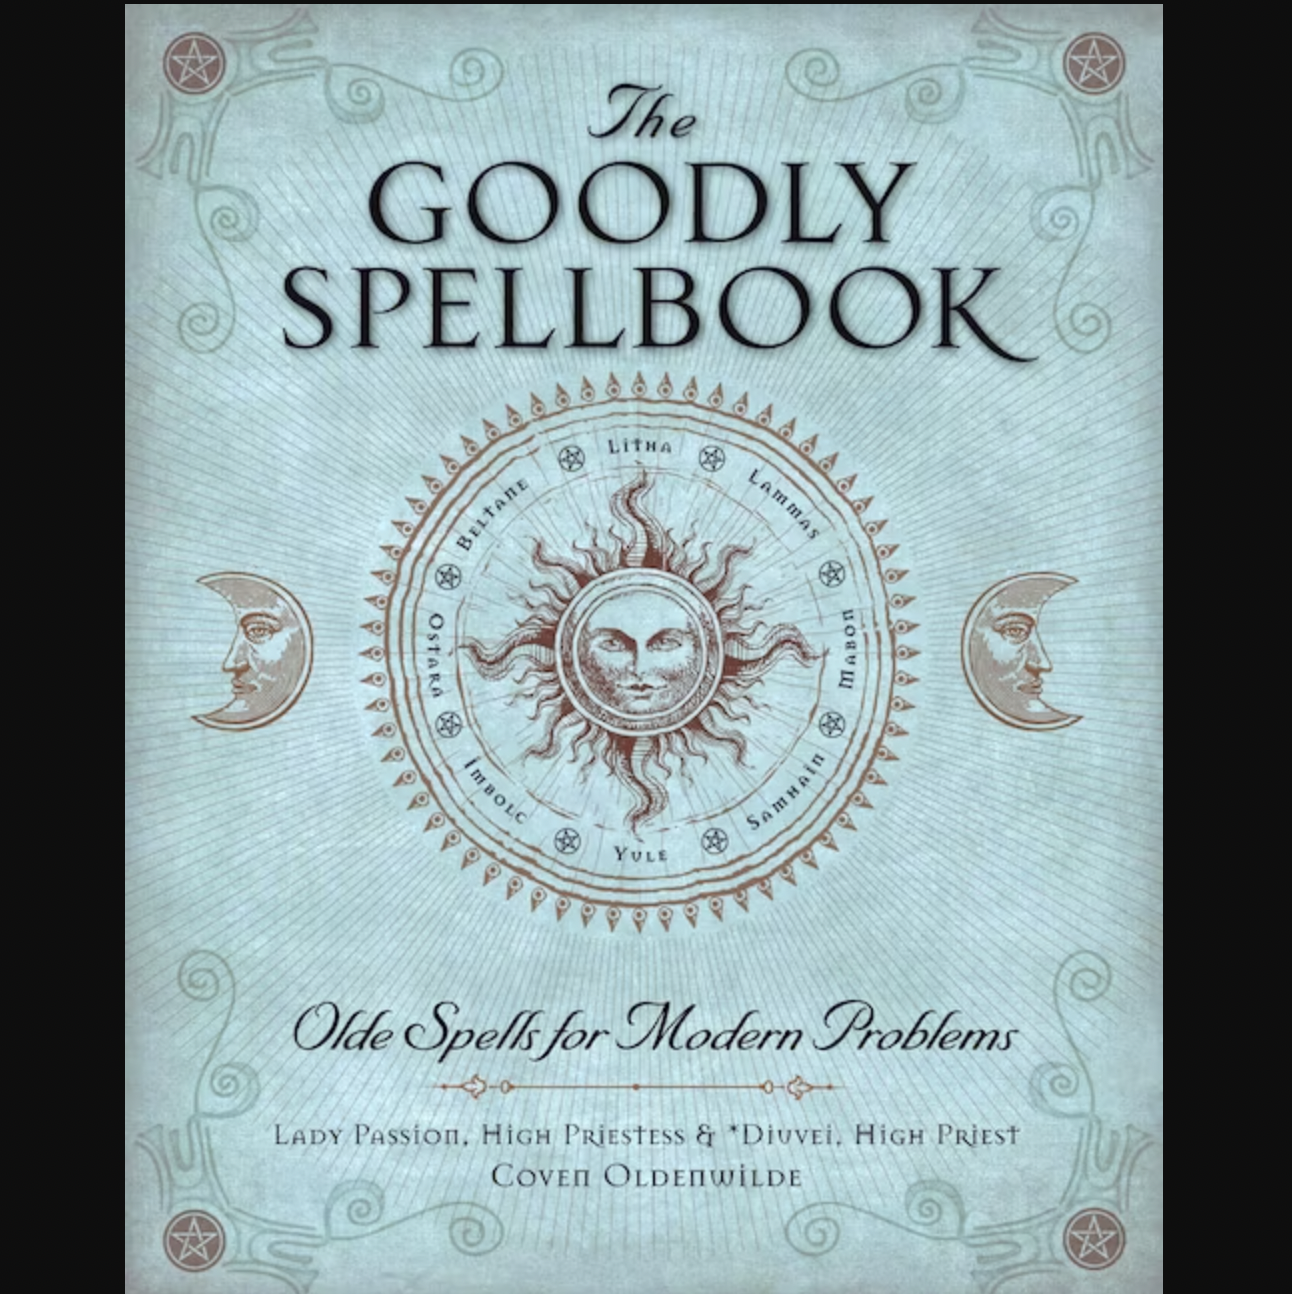 The Goodly Spellbook: Olde Spells for Modern Problems By Lady Passion and Diuvei 